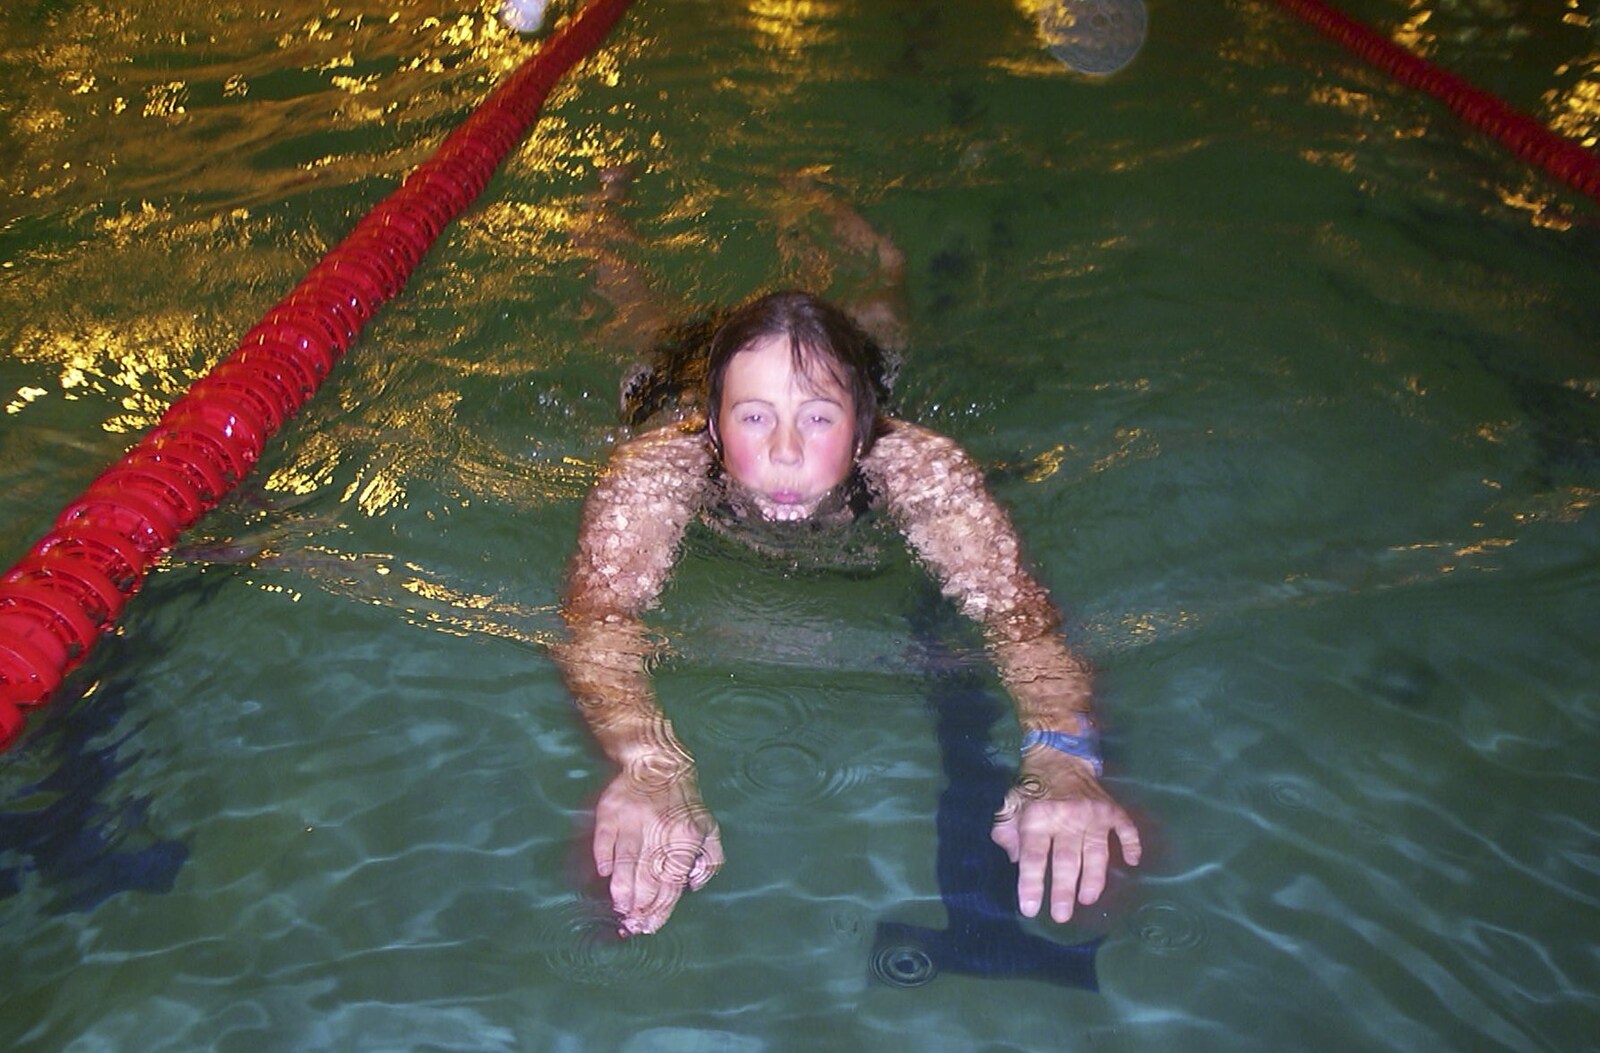 A Sponsored Swim, House Repairs and CISU at the Social Club, Brome, Diss and Ipswich - 5th October 2003: Pippa swims up to the end of the lane